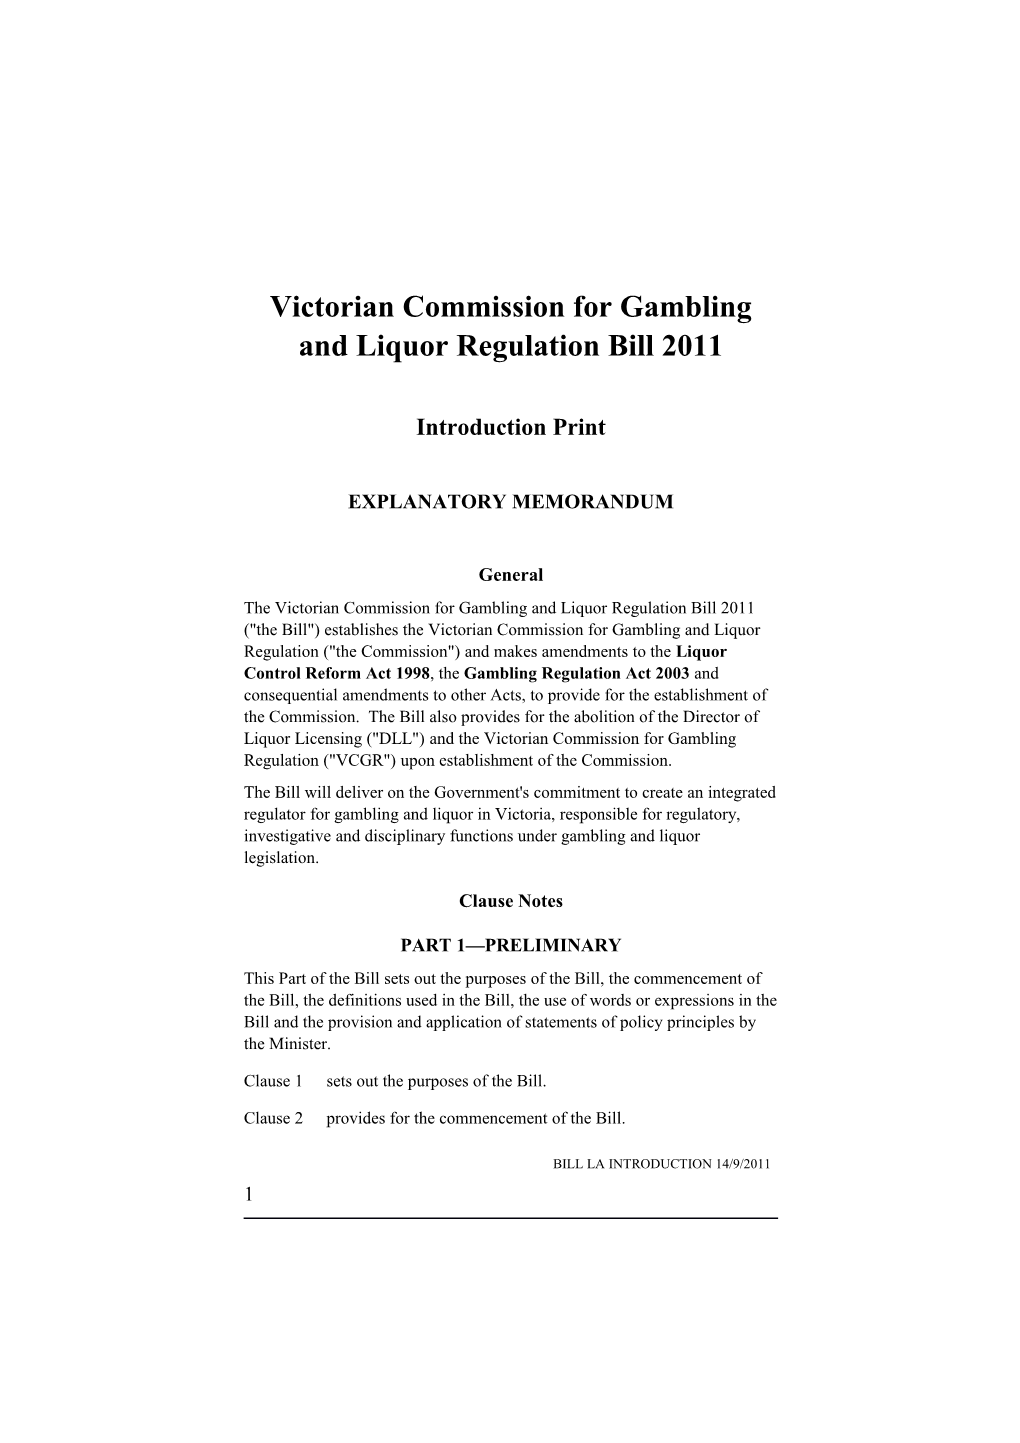 Victorian Commission for Gambling and Liquor Regulation Bill 2011